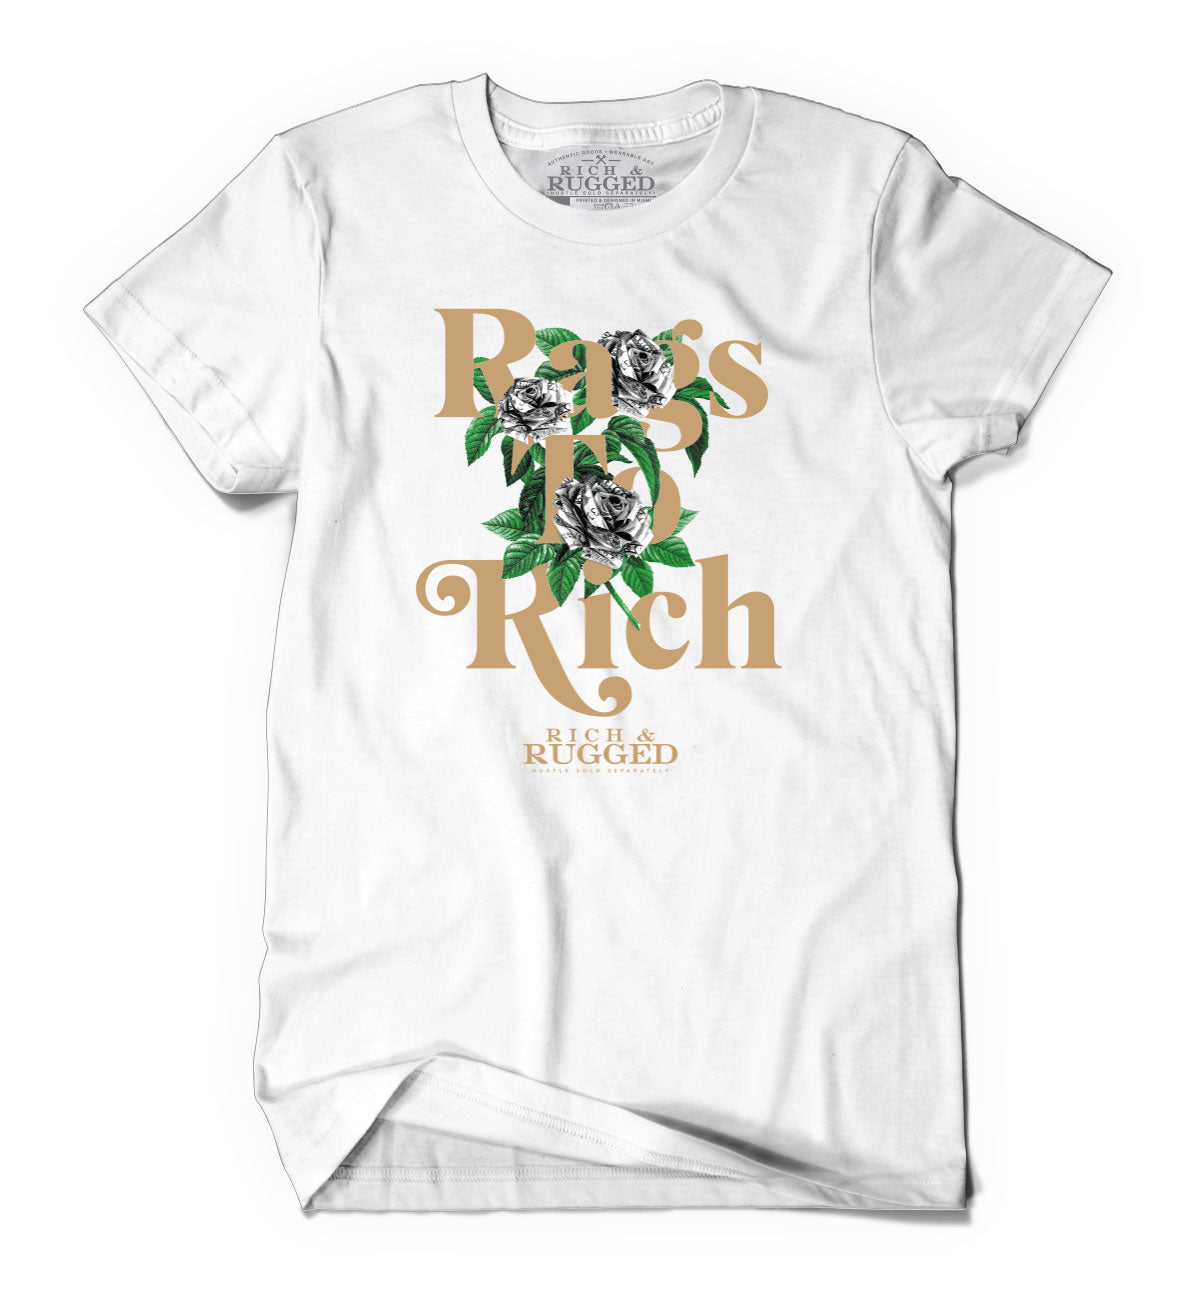 RAGS TO RICH - WHITE 1